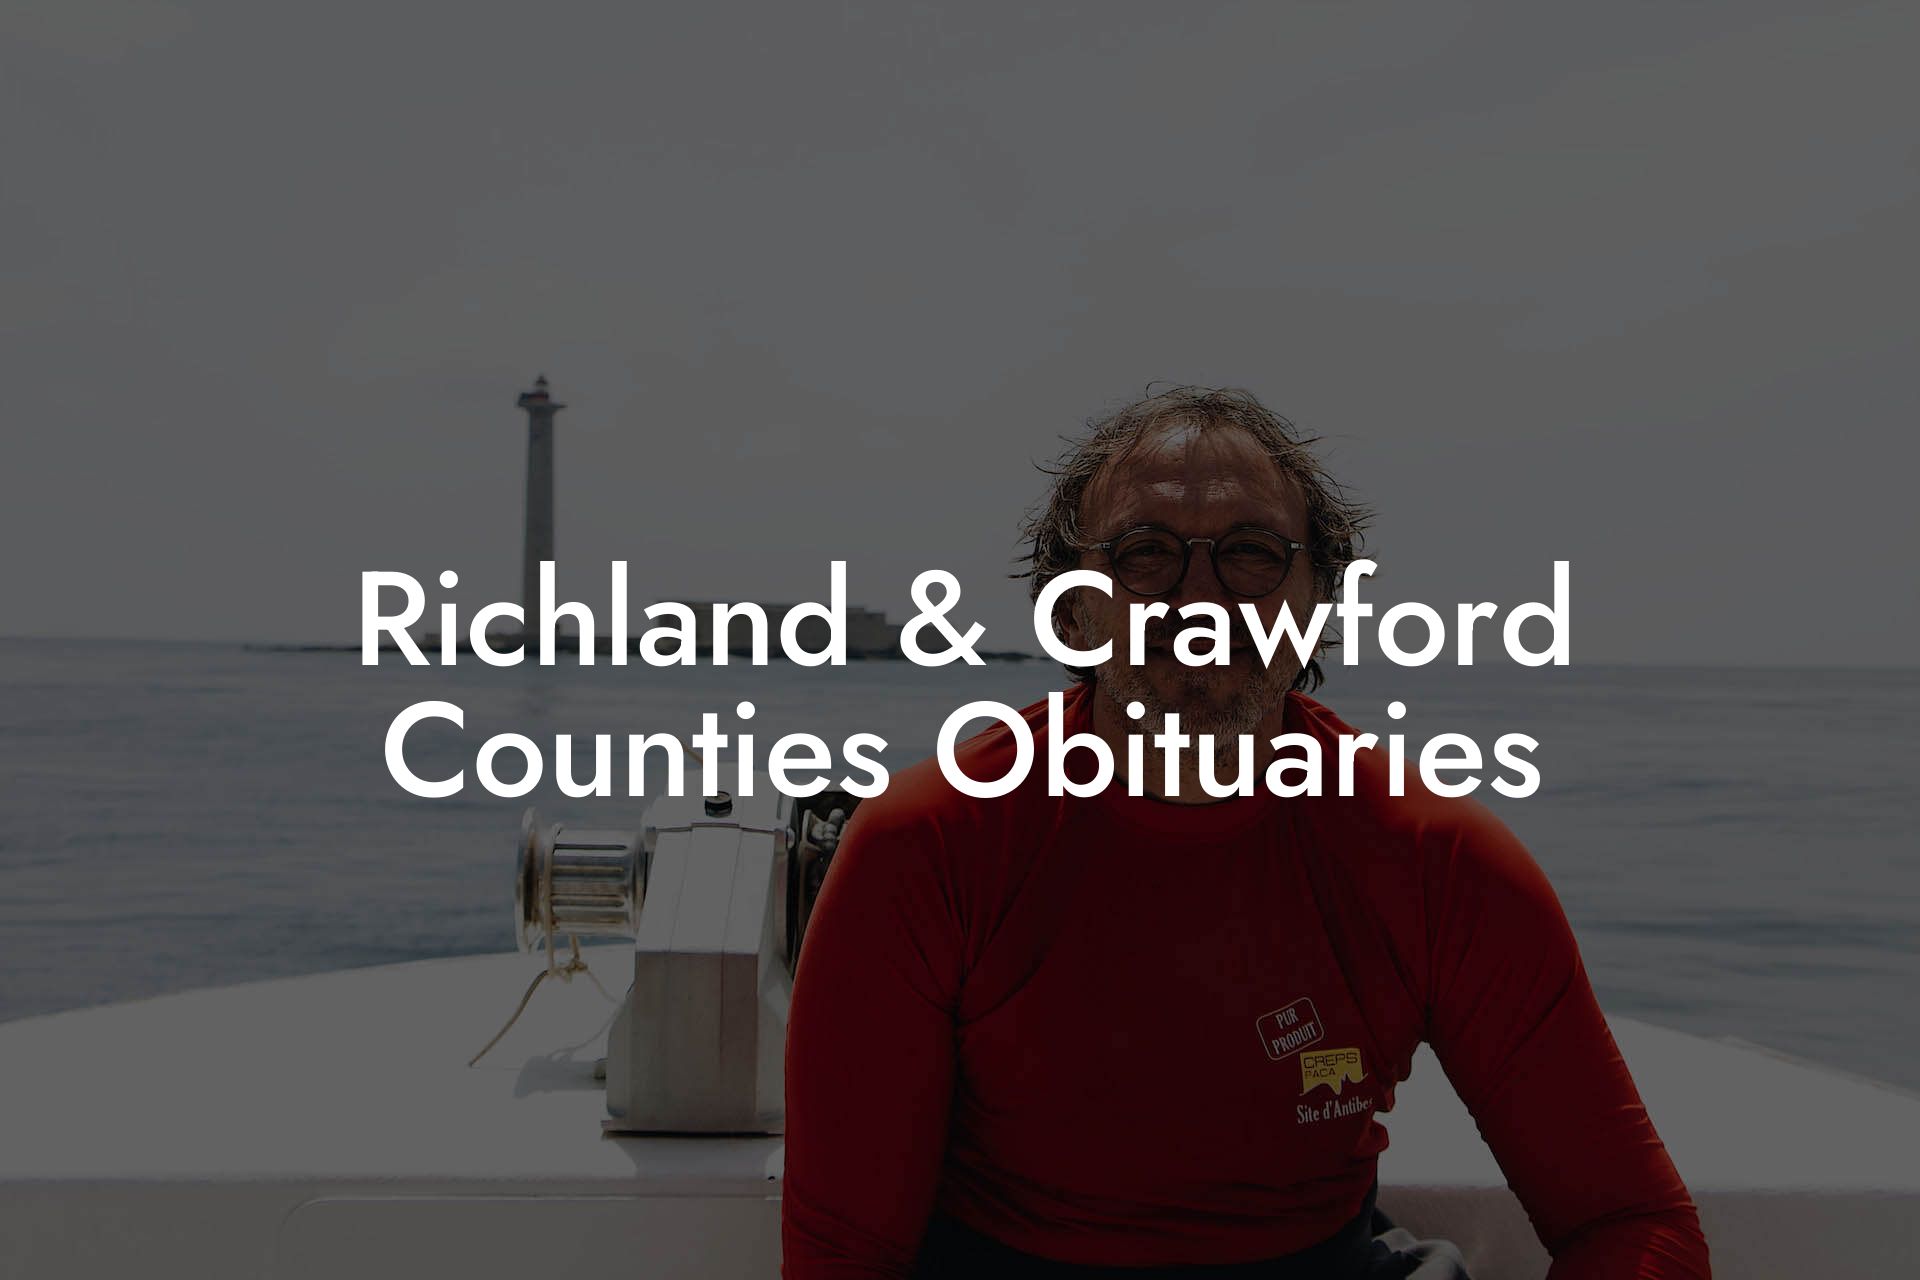 Richland & Crawford Counties Obituaries